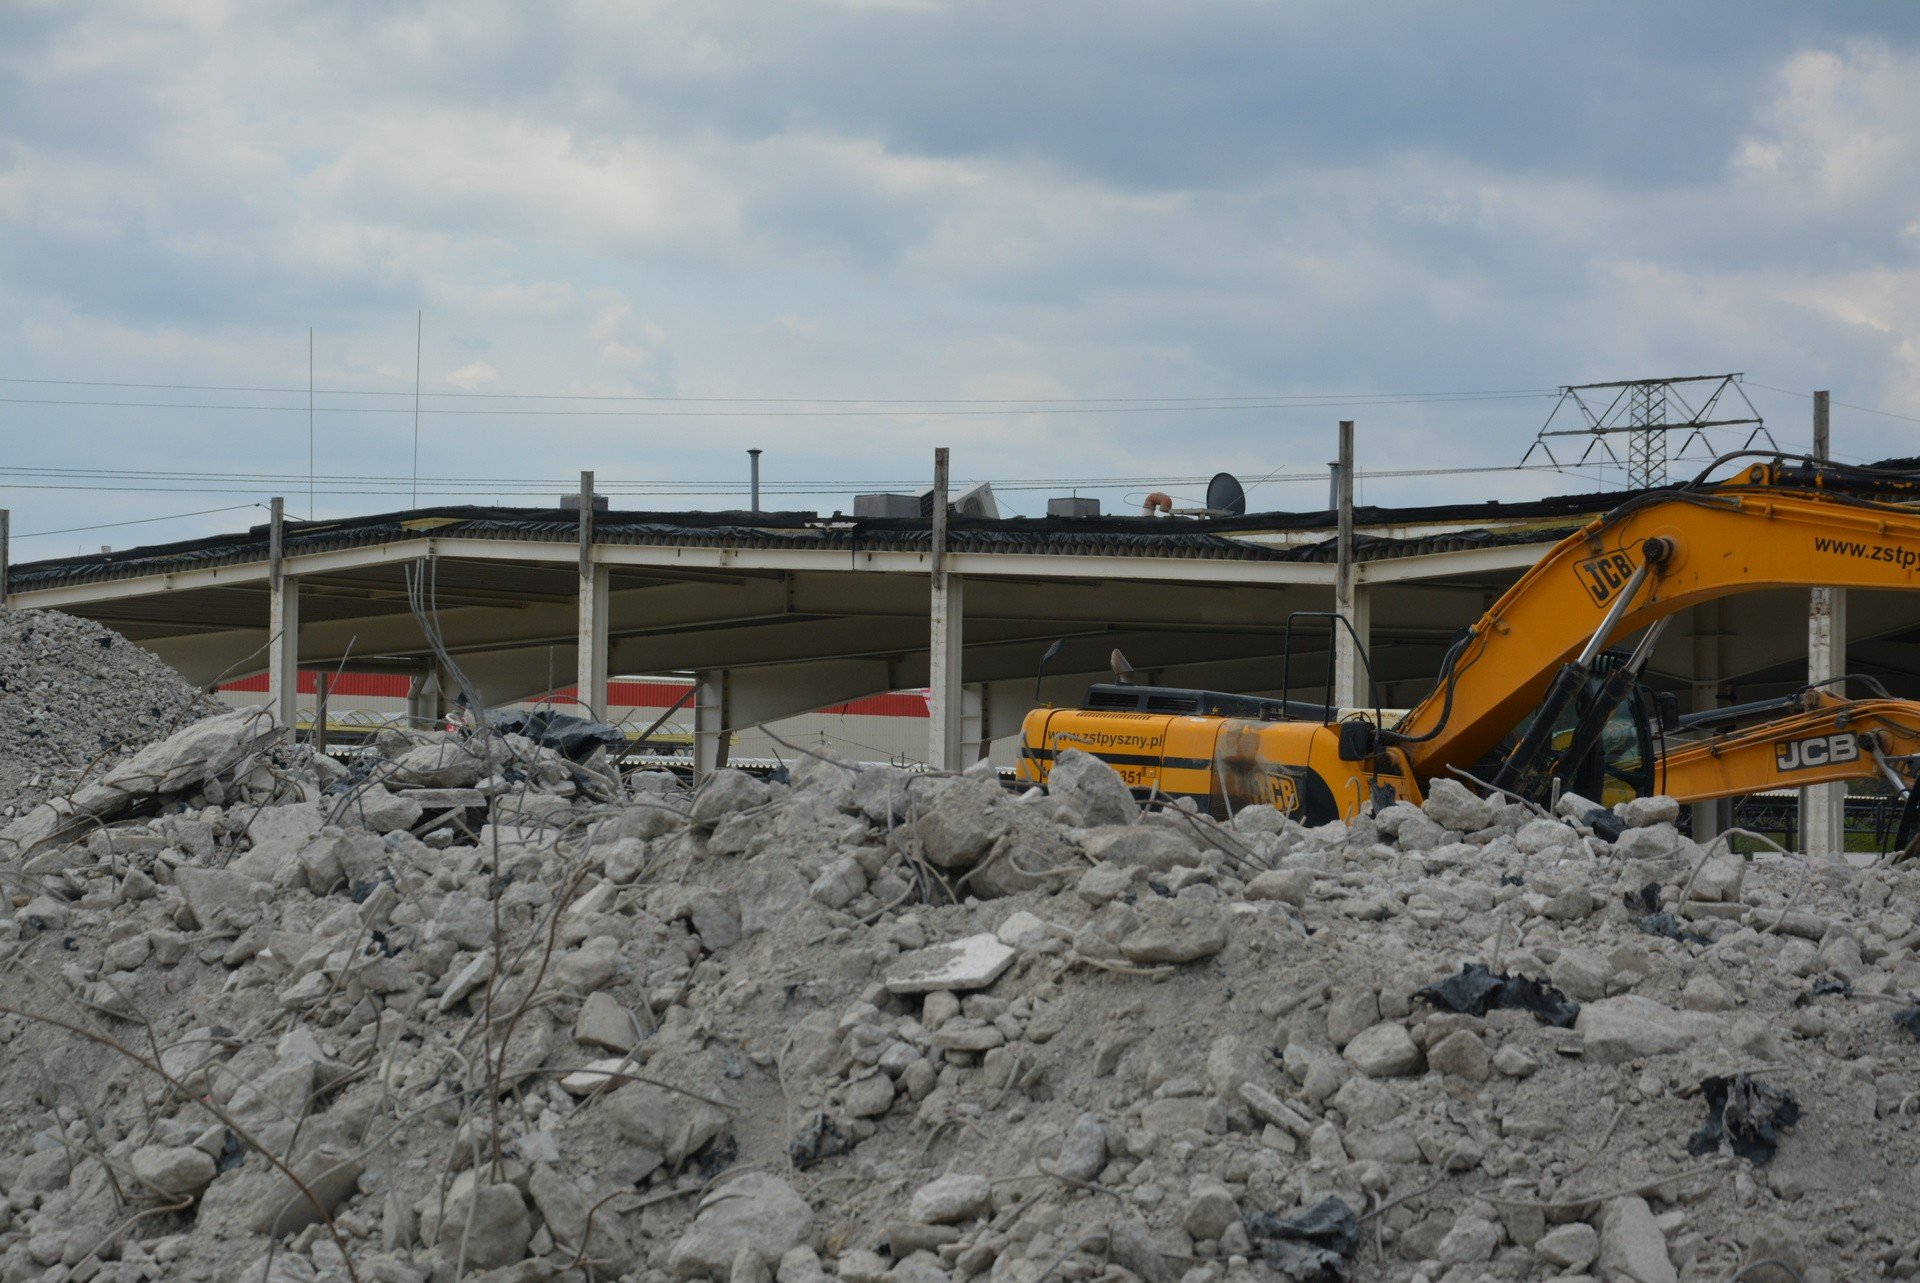 Bytom: After TESCO’s ex-ul.  Only a skeleton remains of Chorzowska.  The parking lot looks like a battlefield